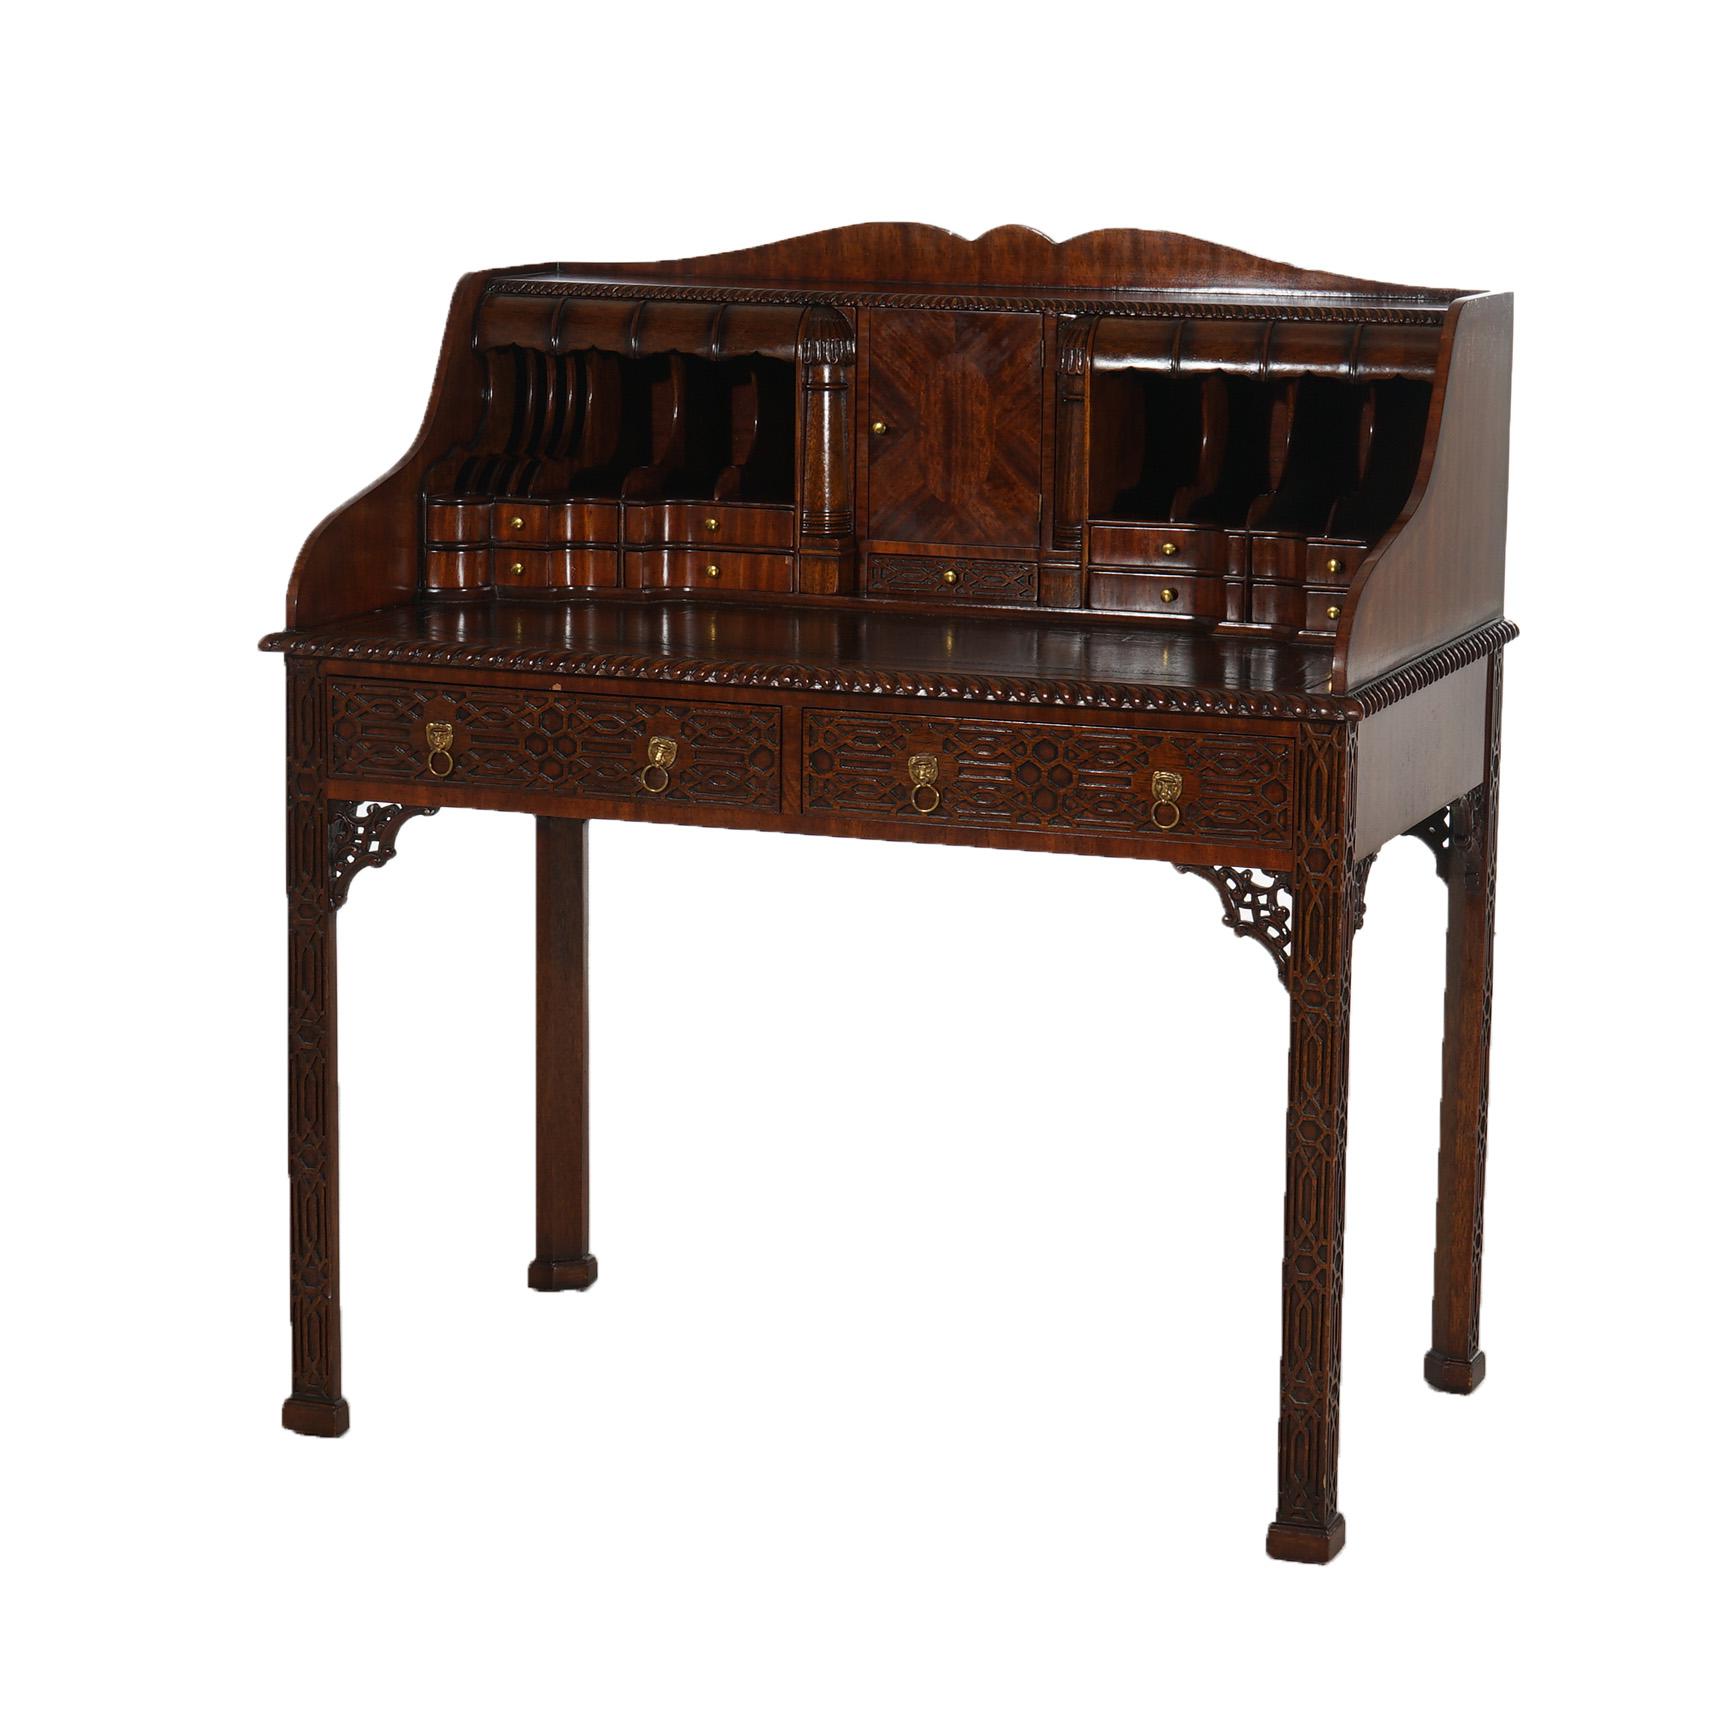 ***Ask About Reduced In-House Delivery Rates - Reliable Professional Service & Fully Insured***
A Chinese Chippendale style desk set by Maitland Smith offers mahogany desk with shaped rail over pigeon hole backsplash, pierced corbels and raised on